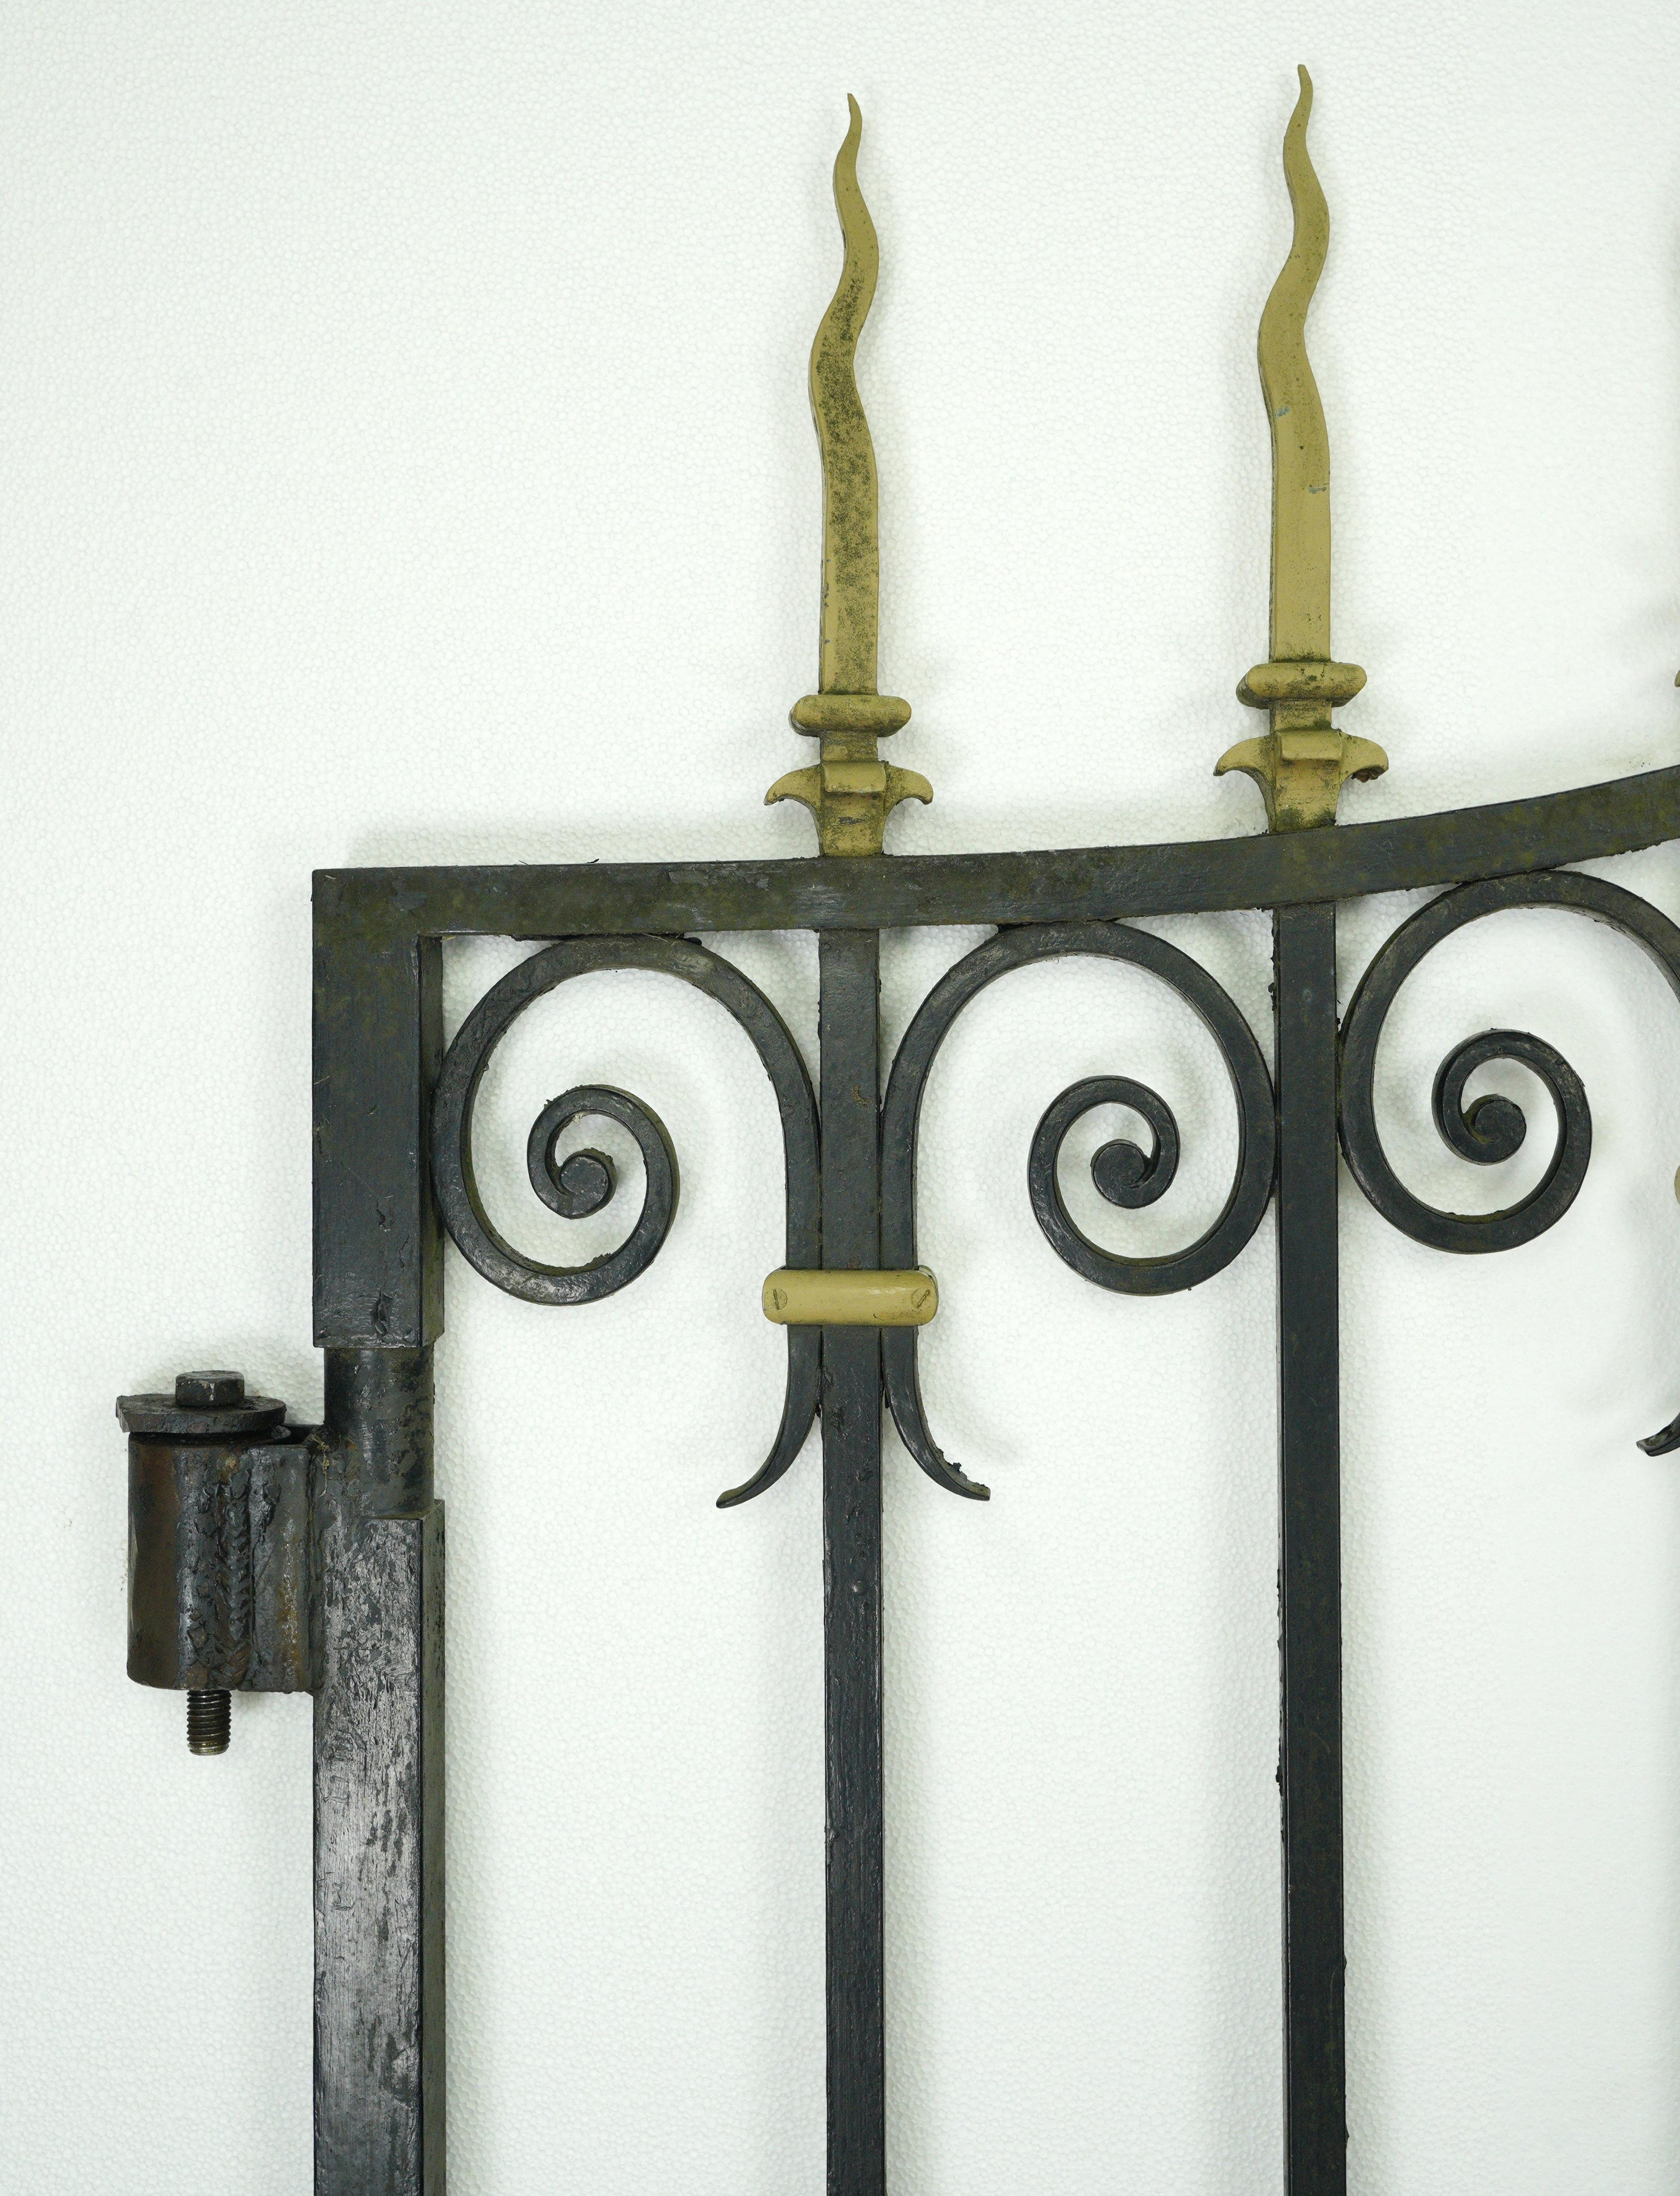 Reclaimed driveway gates made from black wrought iron and brass accents. This piece was acquired from an estate located in Greenwich, Connecticut. Very good condition with appropriate wear from age. Priced as a pair. Please note, this item is